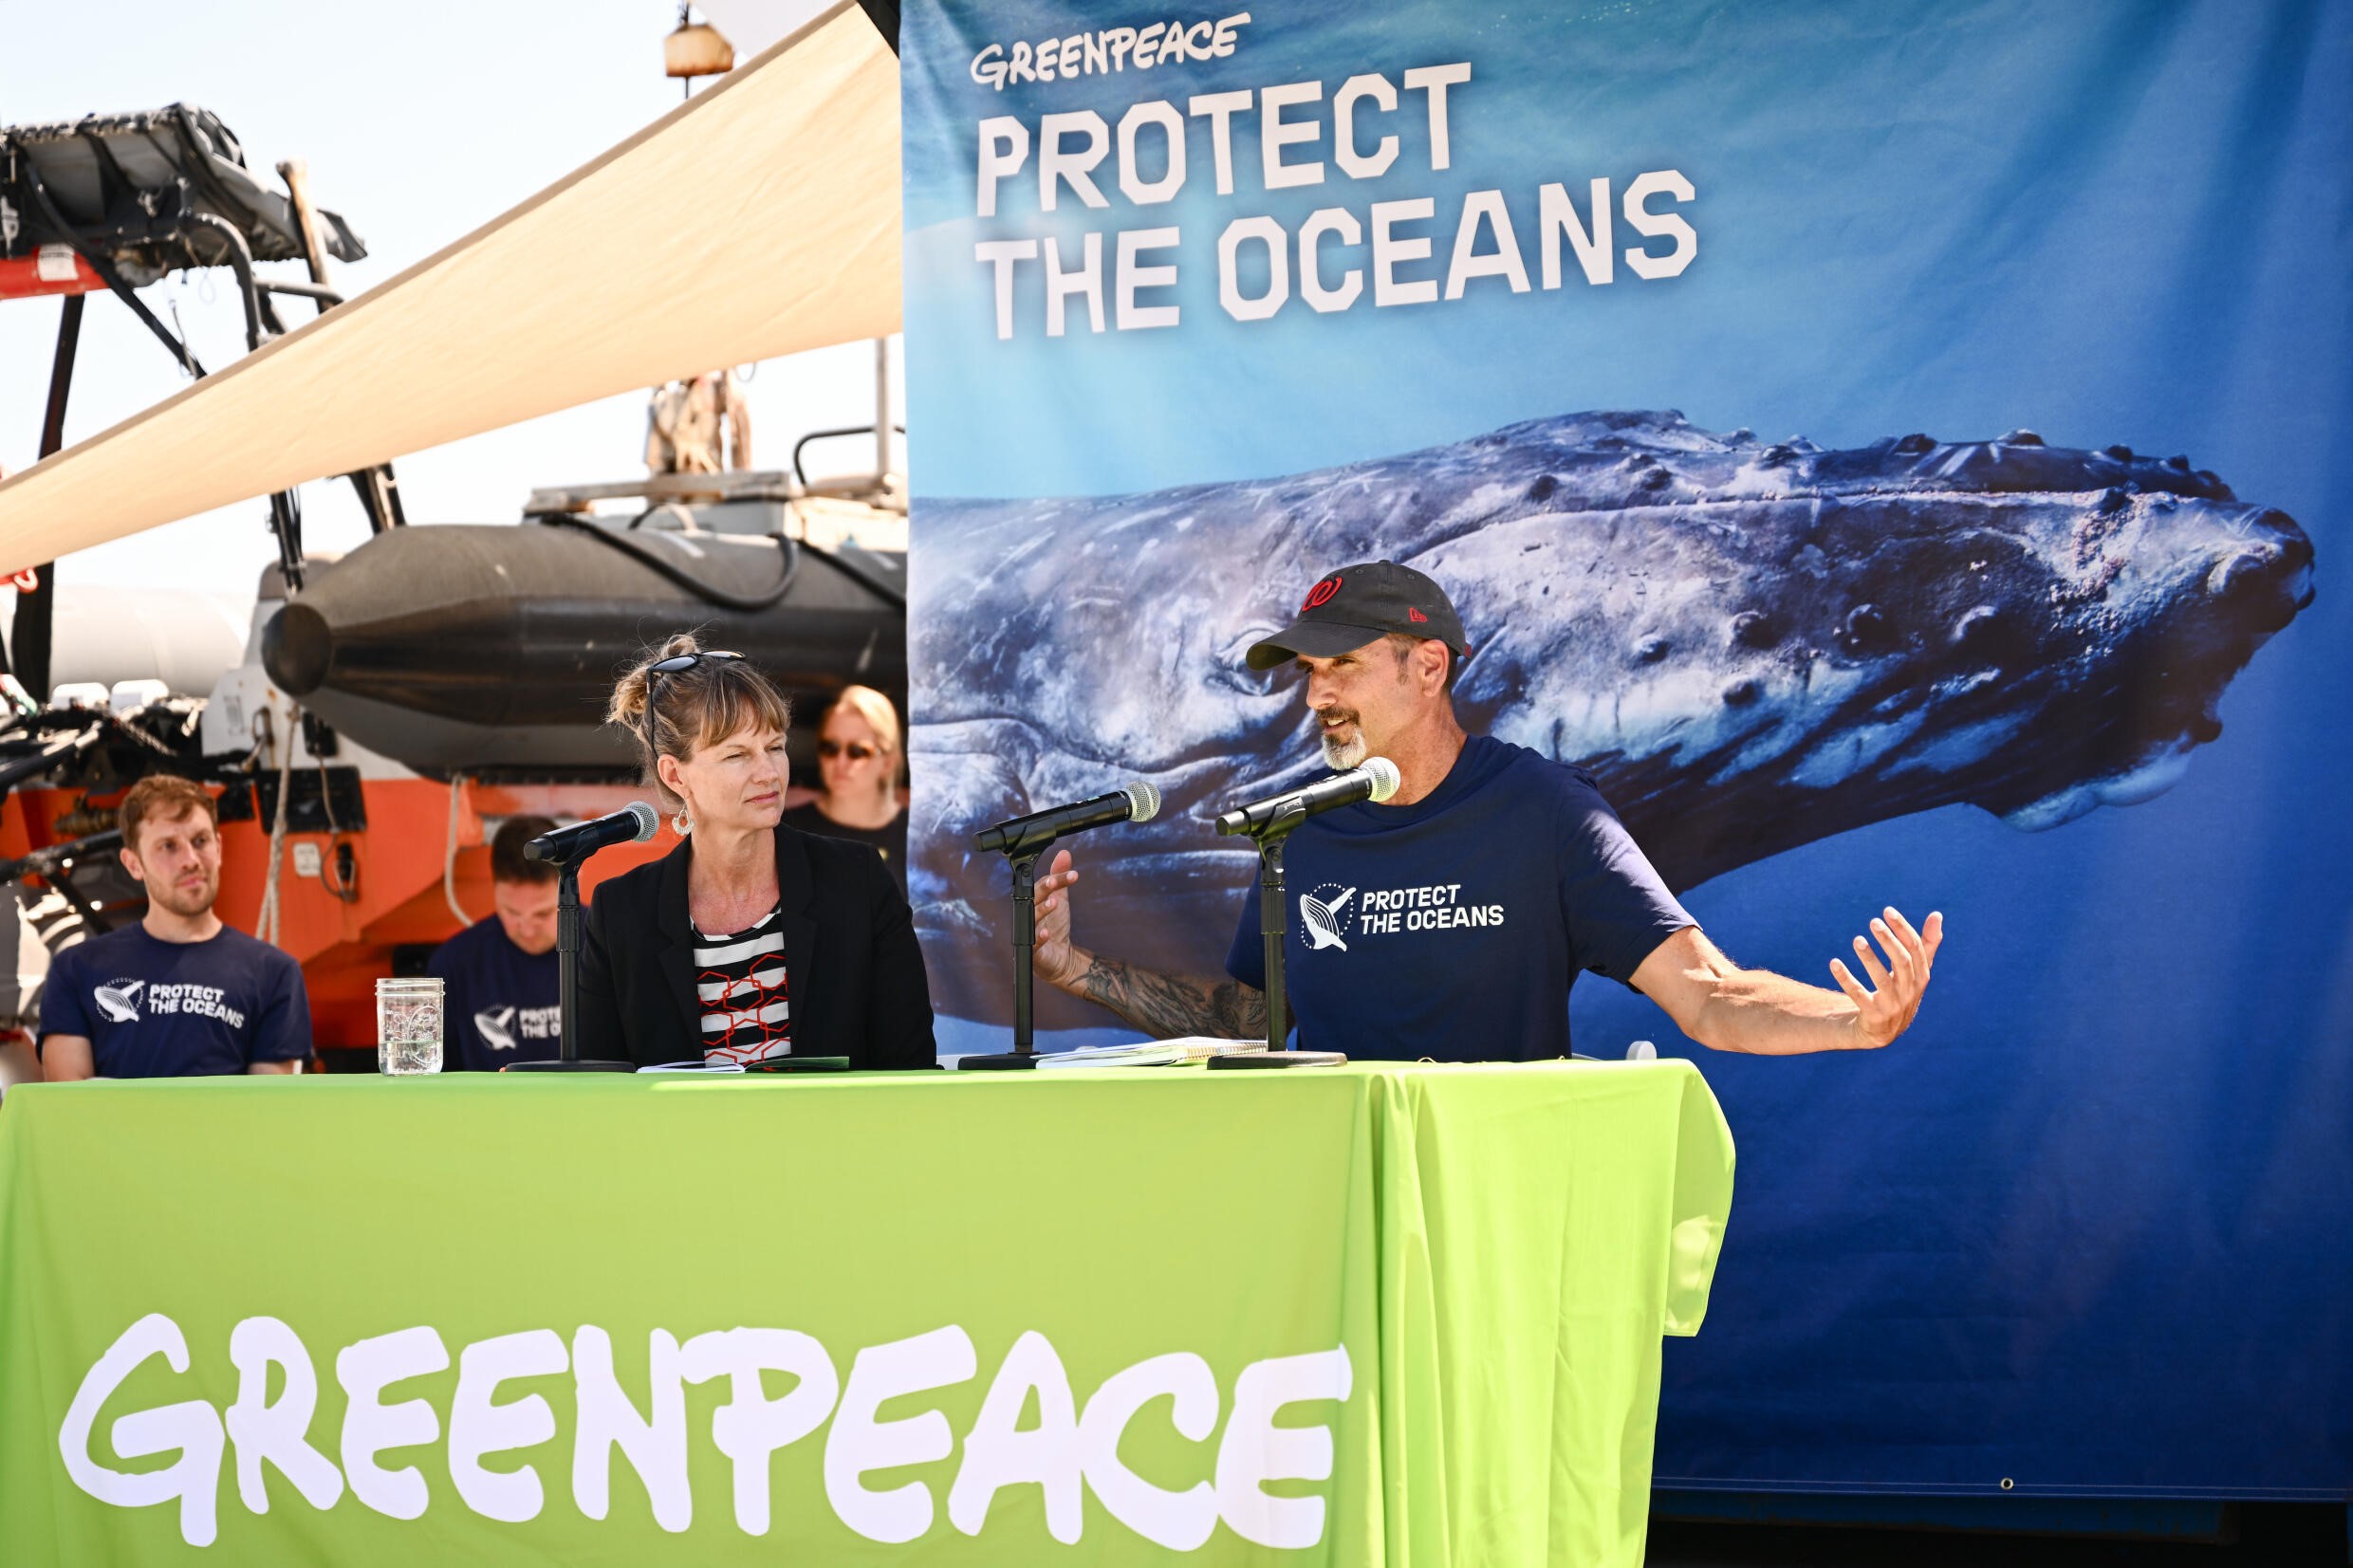 Marine experts and Greenpeace activists speak during a launch event for a Greenpeace report calling for ratification of a global oceans treaty to protect marine biodiversity and fish stocks. Photo: AFP